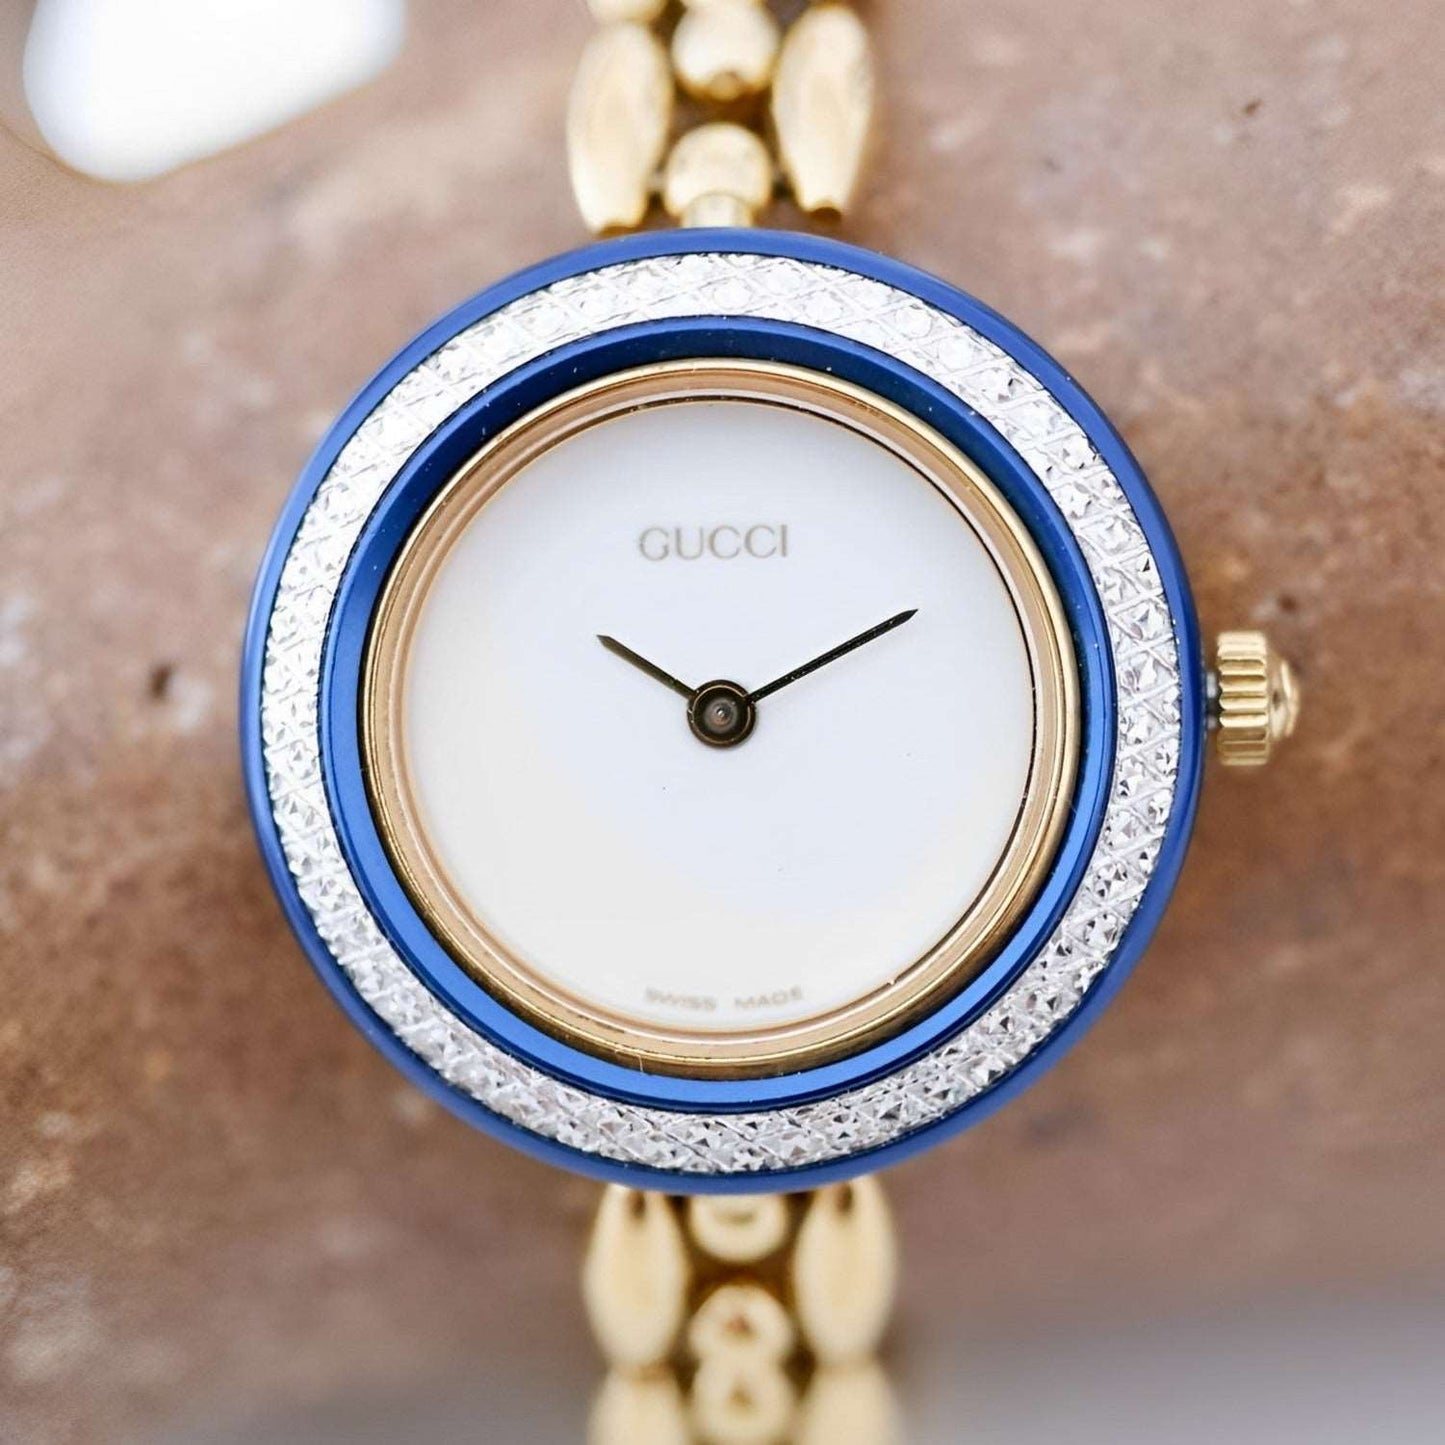 Gucci 11/12.2 Bezel Vintage Ladies Watch: 90s Golden Classic, First Front Side